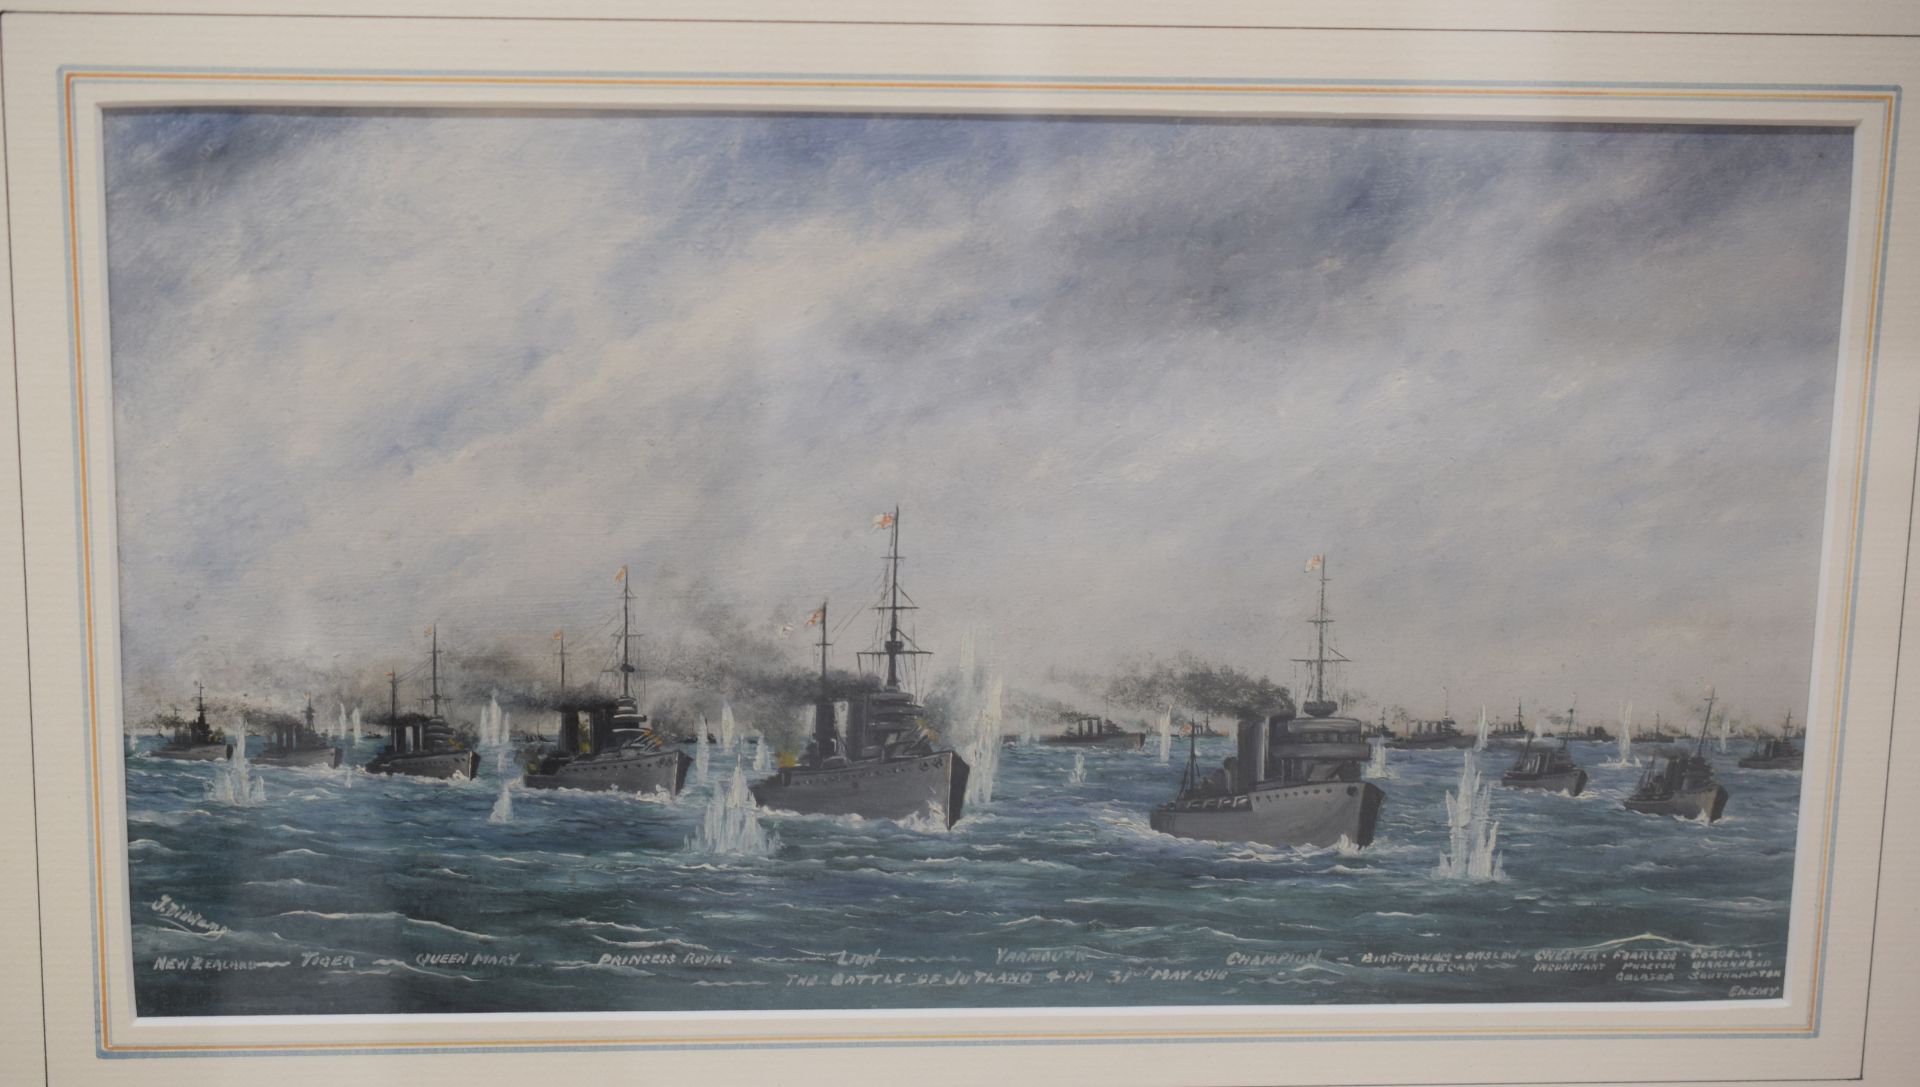 The Battle Of Jutland at 4pm 31st May Oil Painting by James George Diddams